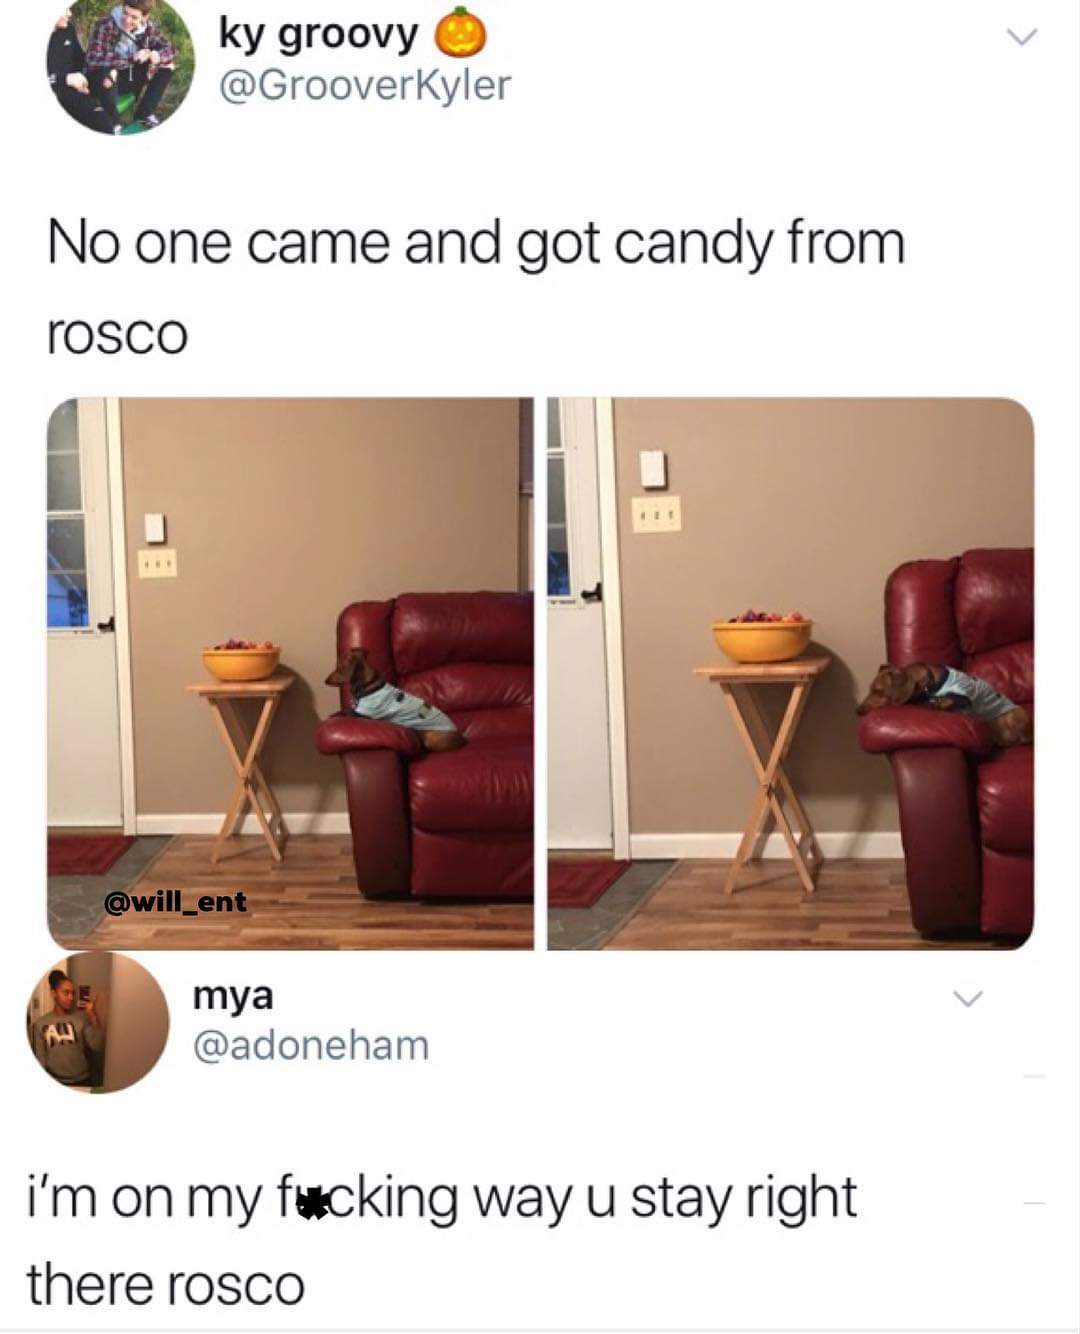 Wednesday meme of Rosco the dog that no body came to get candy from